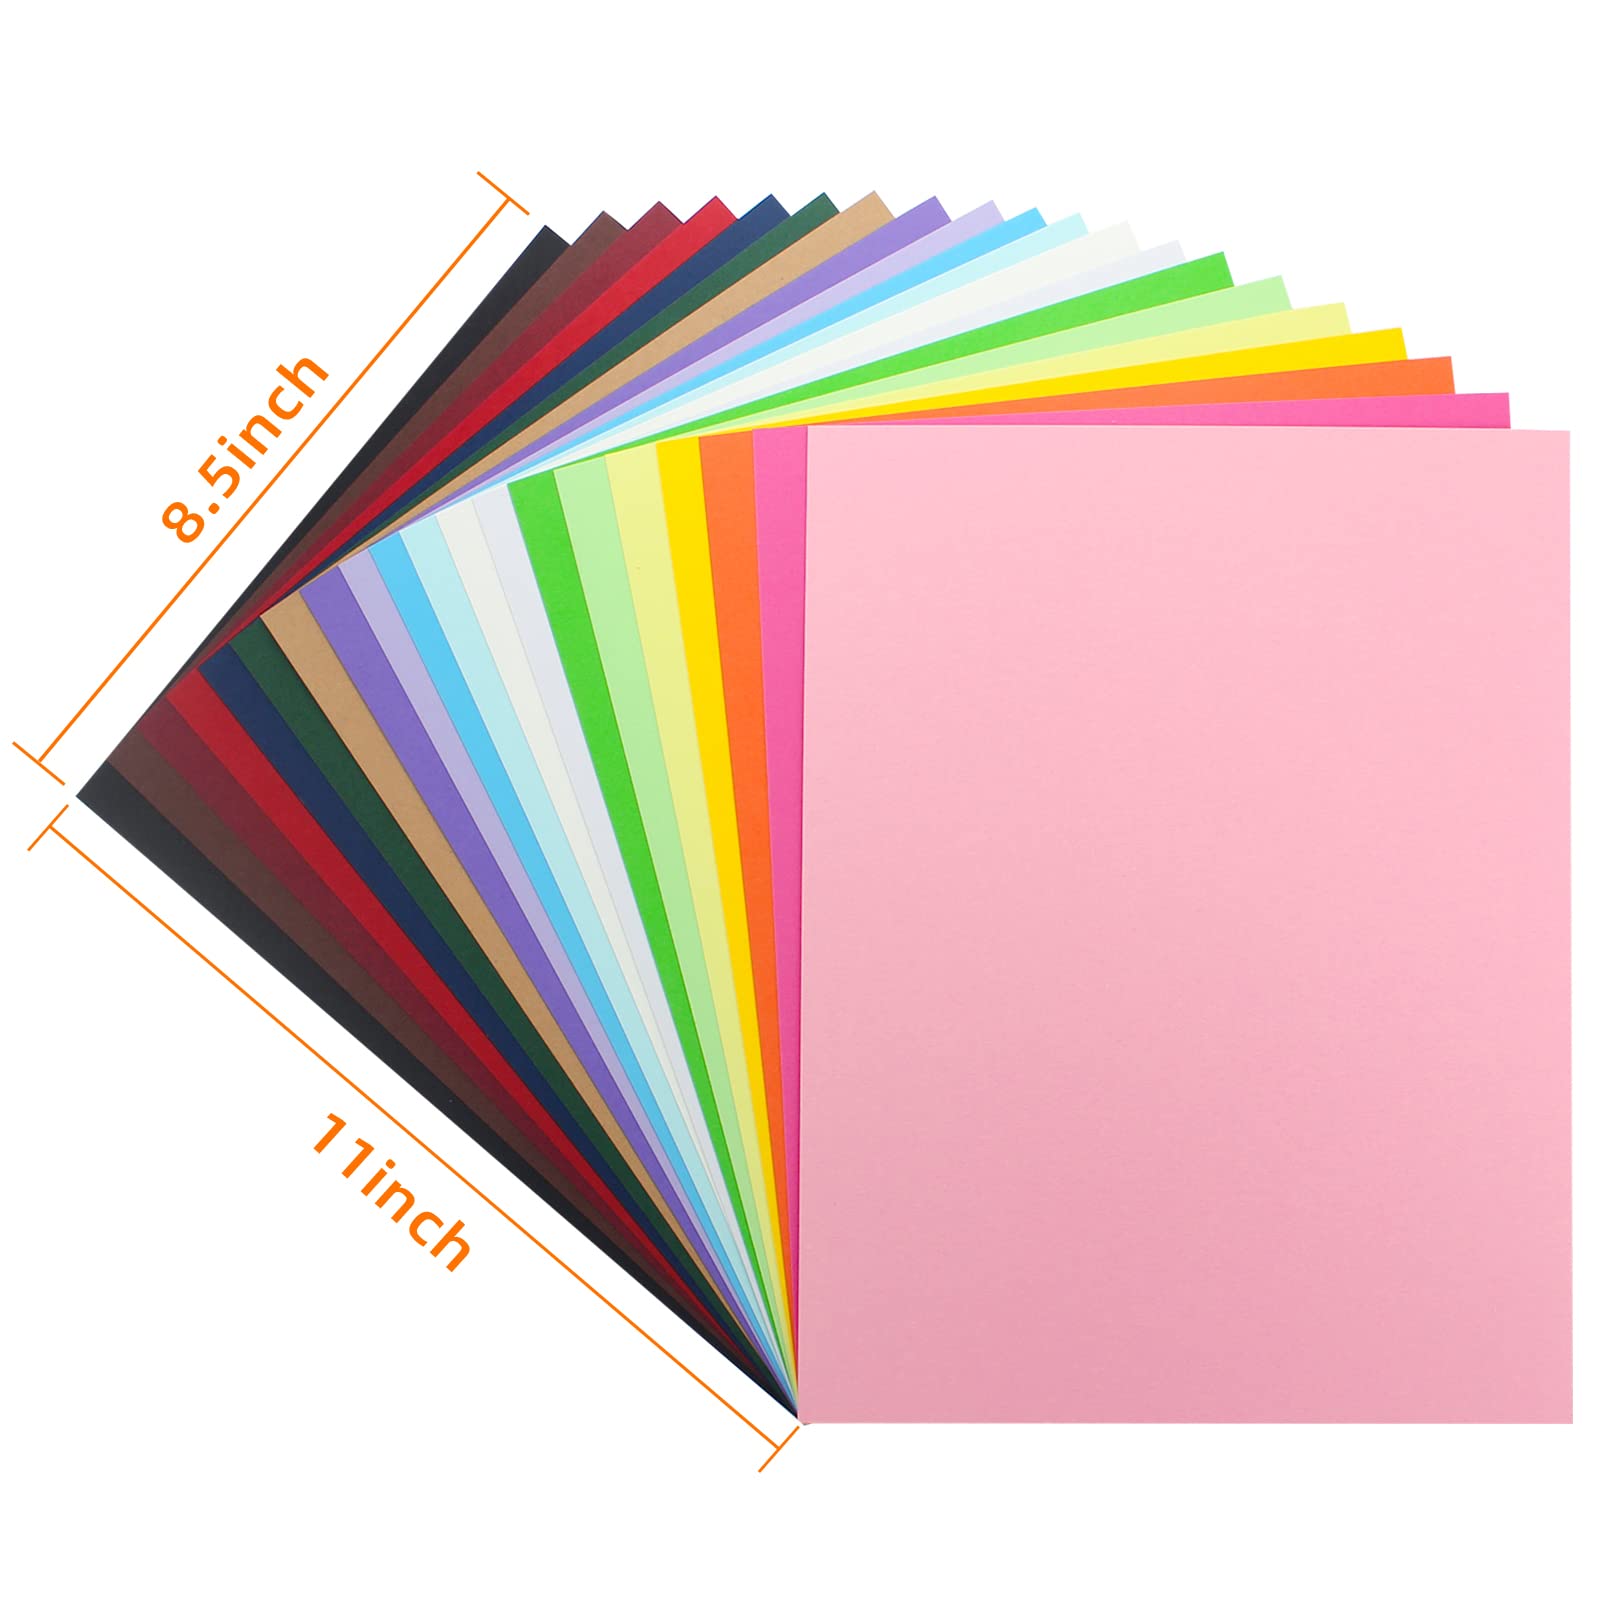 60 Sheets Colored Cardstock 8.5 x 11 Assorted 20 Colors, 85 lb Solid Core Colored Card Stock Printer Paper8.5 x 11 for Card Making, Cricut, Craft, Scrapbooking